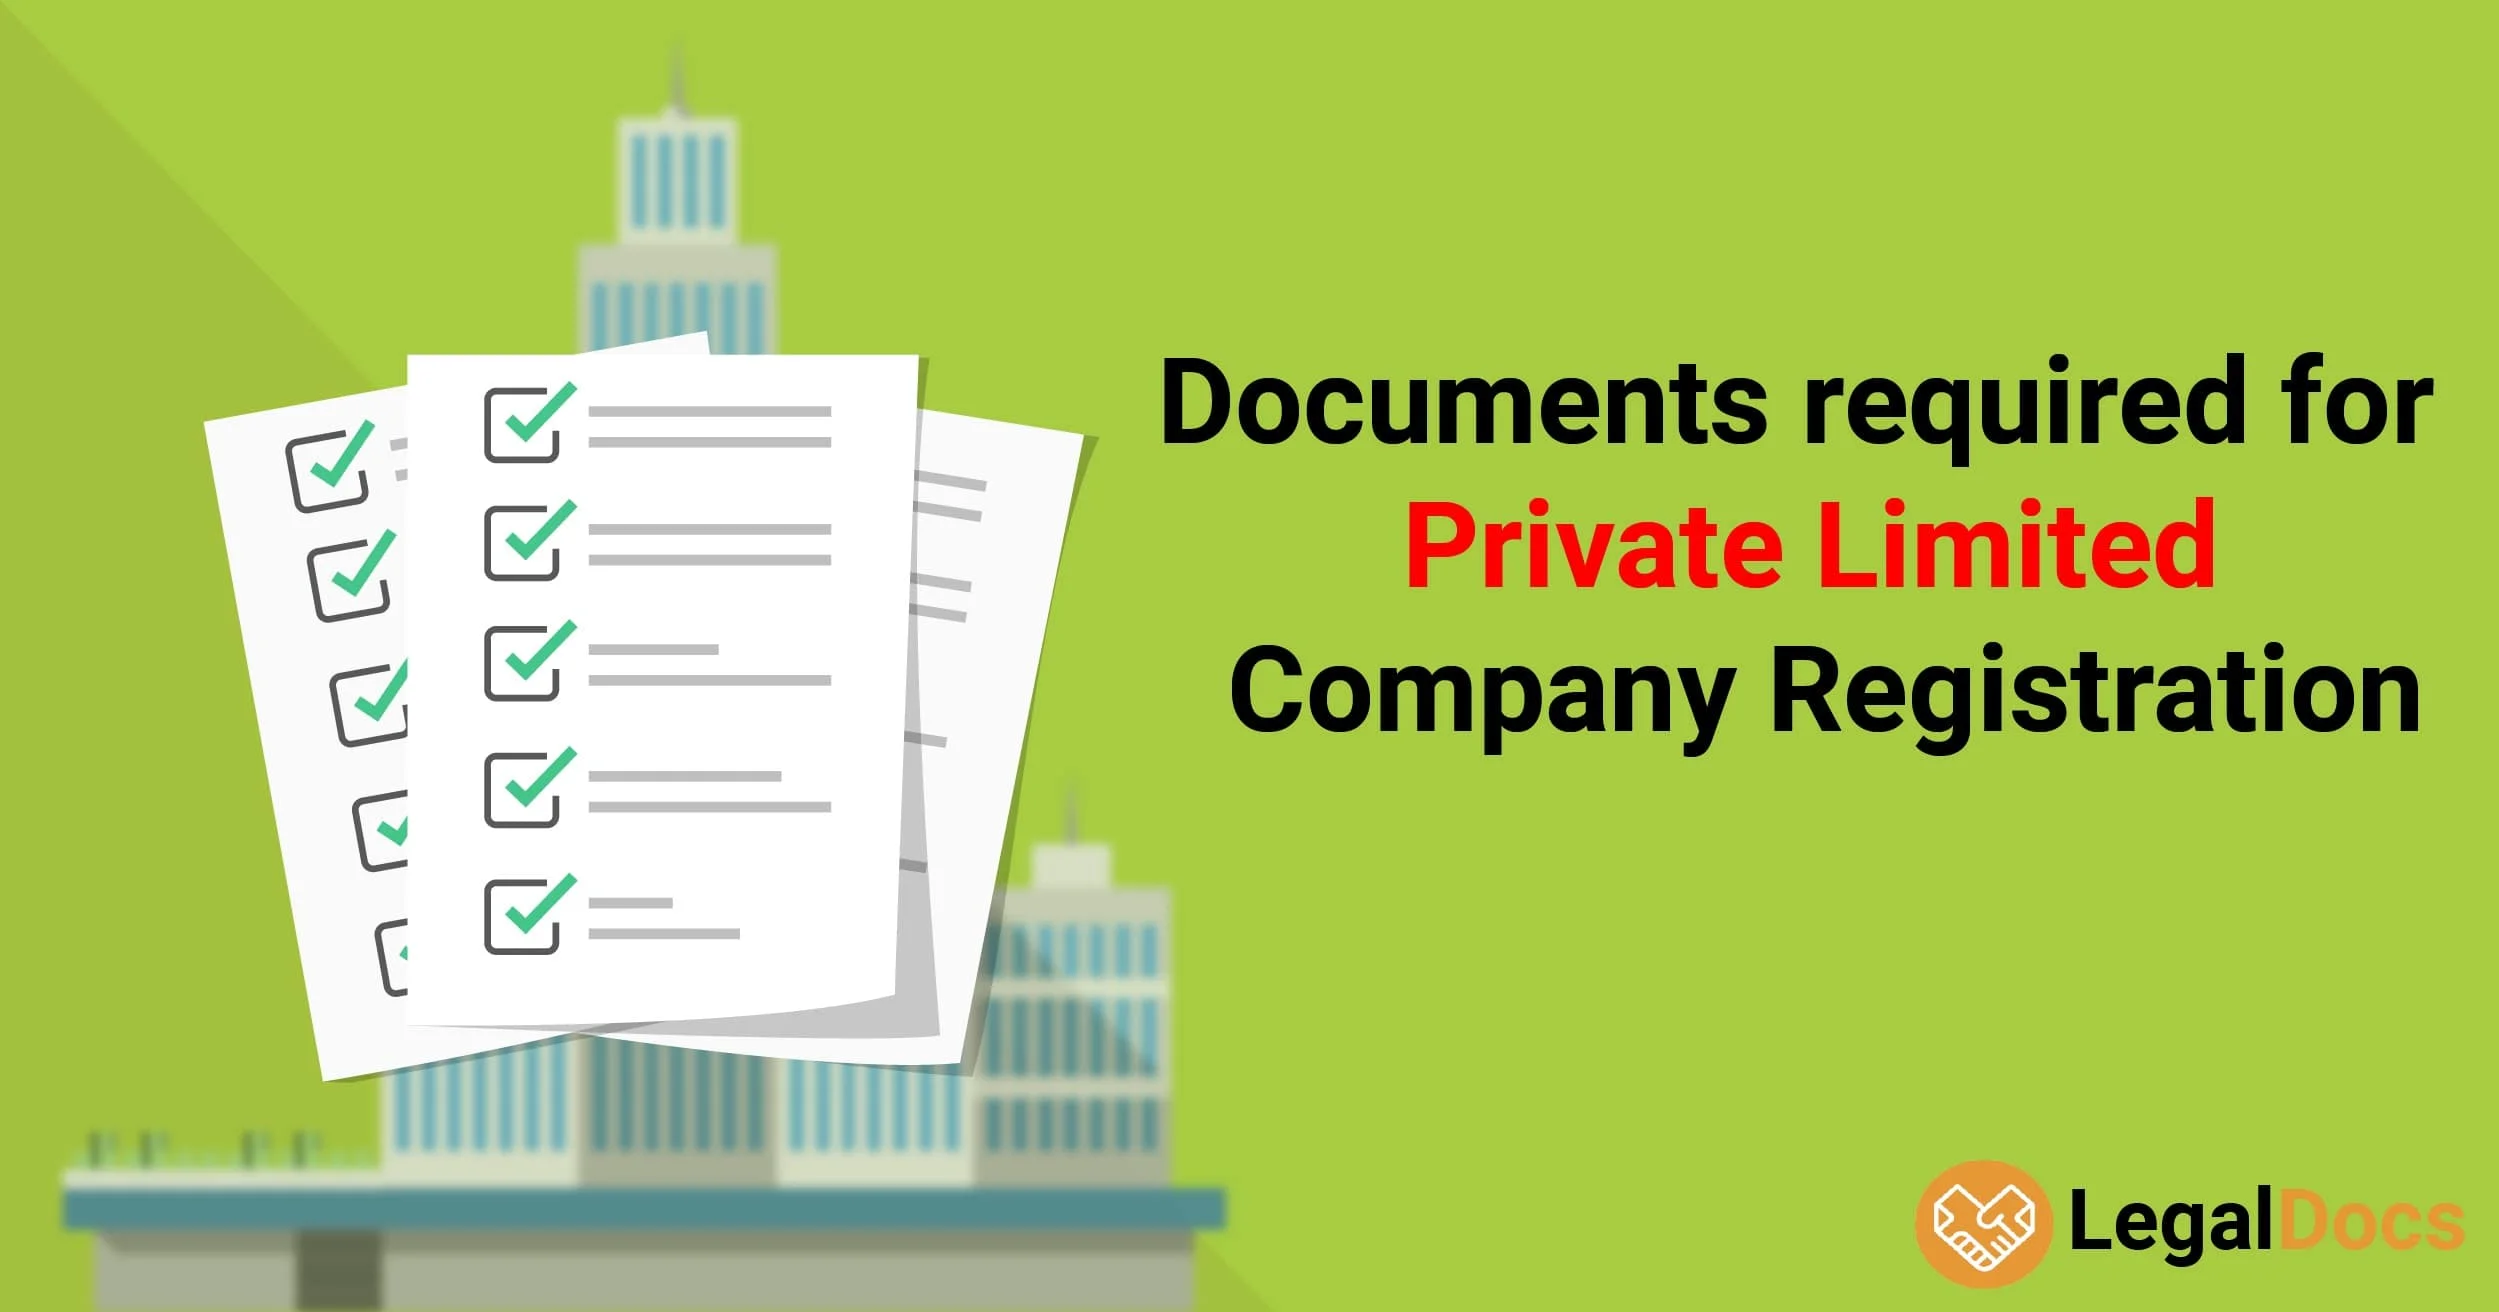 Documents required for Private Limited Company Registration